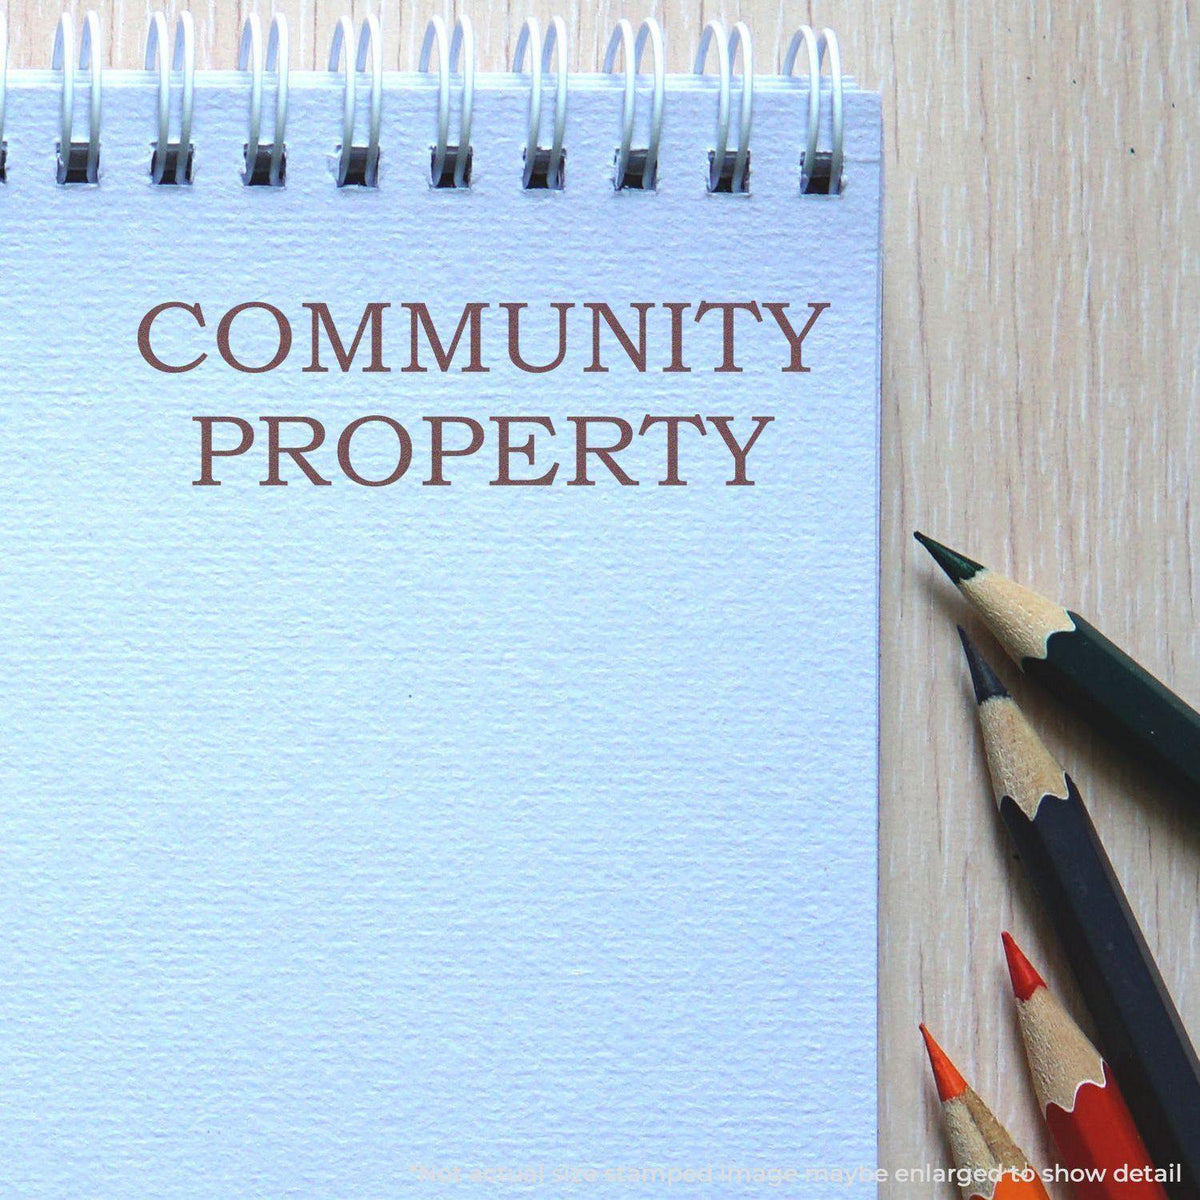 In Use Large Community Property Rubber Stamp Image